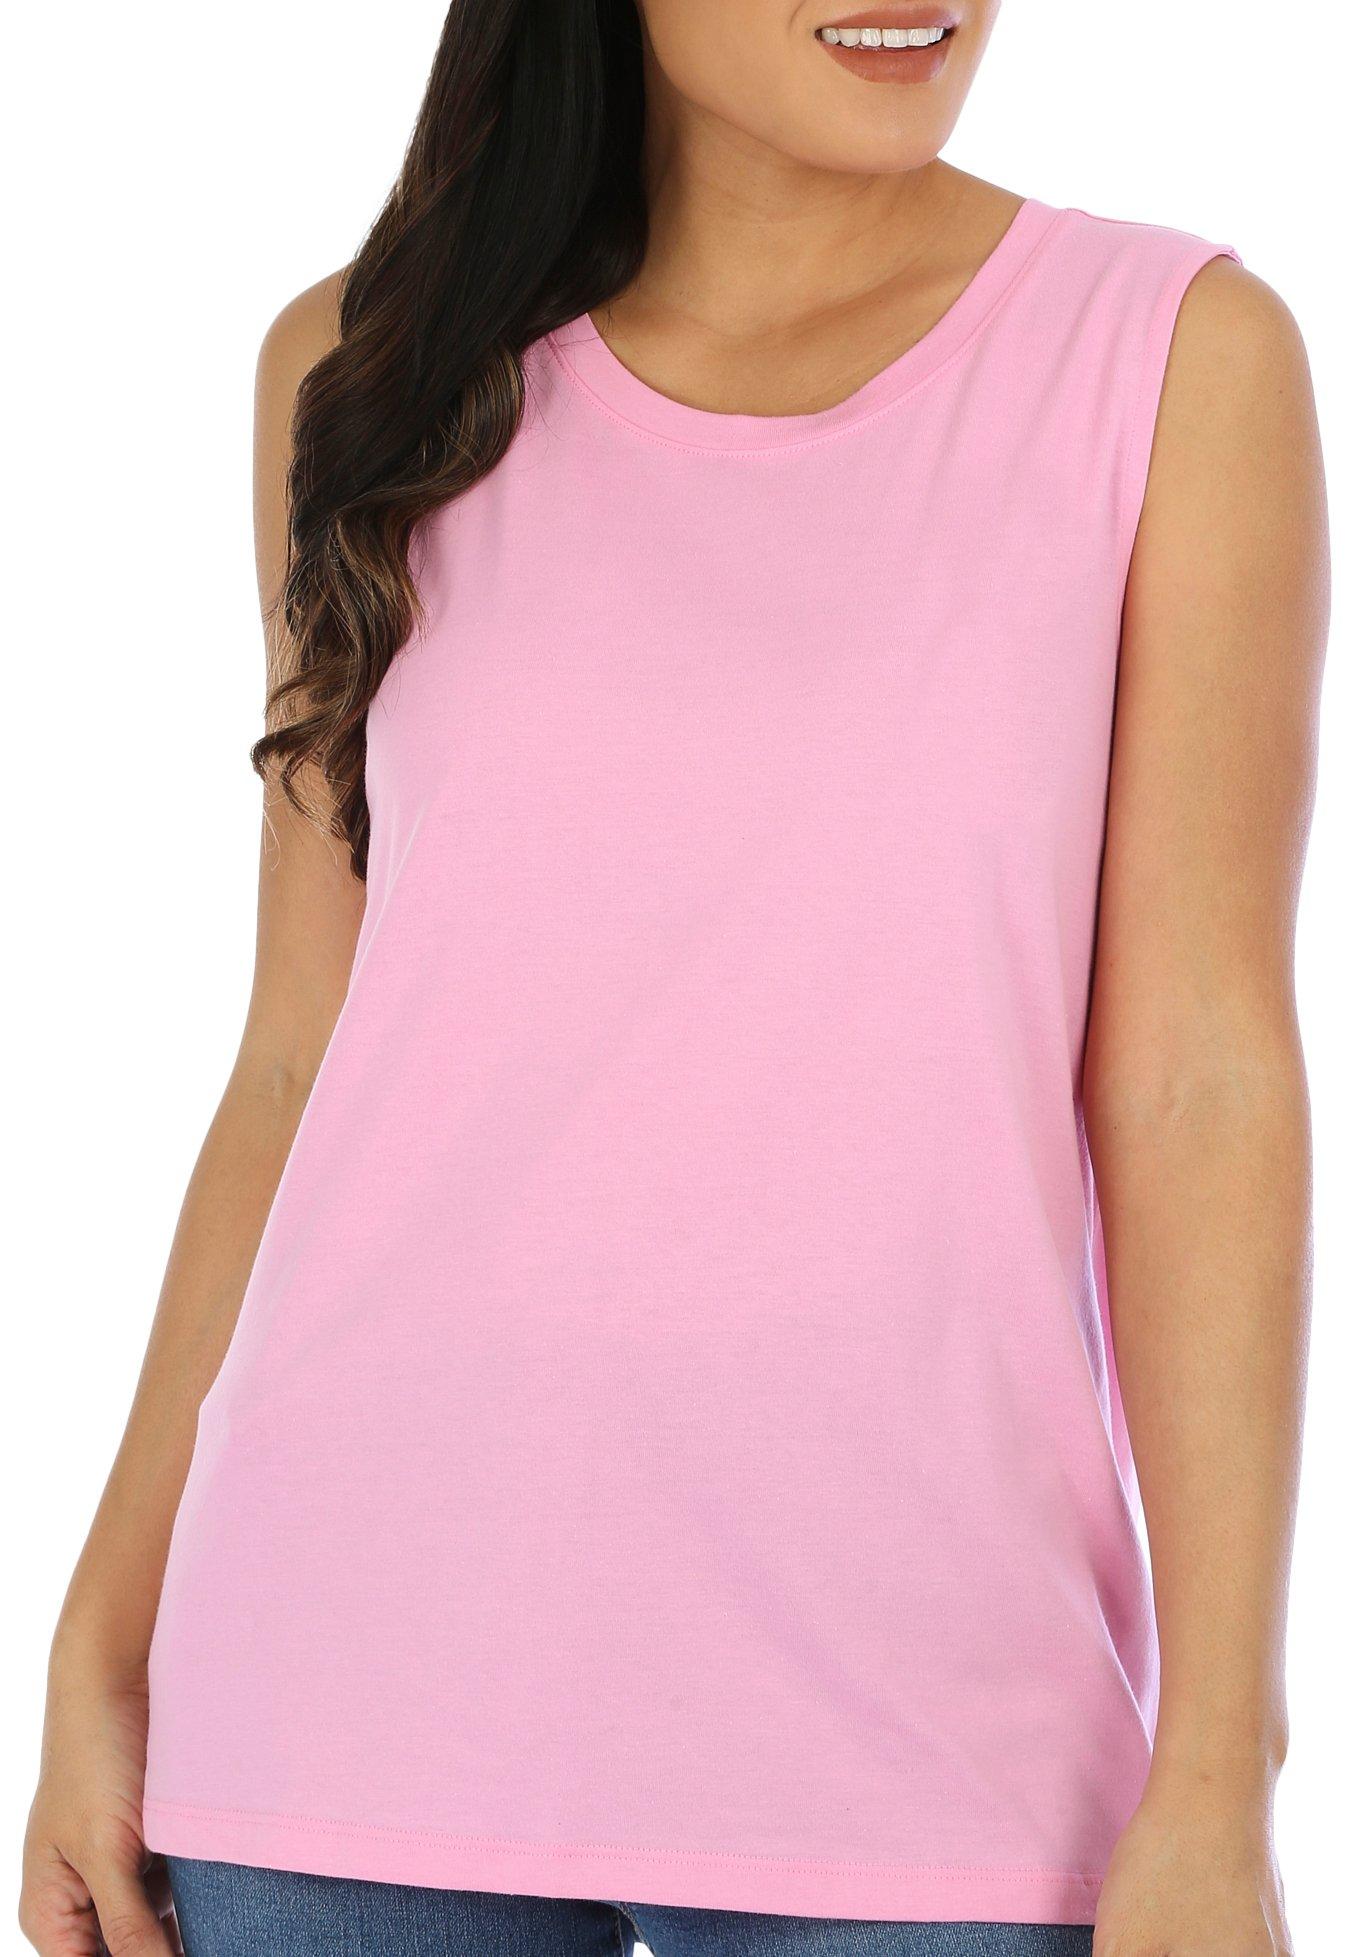 Coral Bay Womens Solid Crew Neck Sleeveless Top